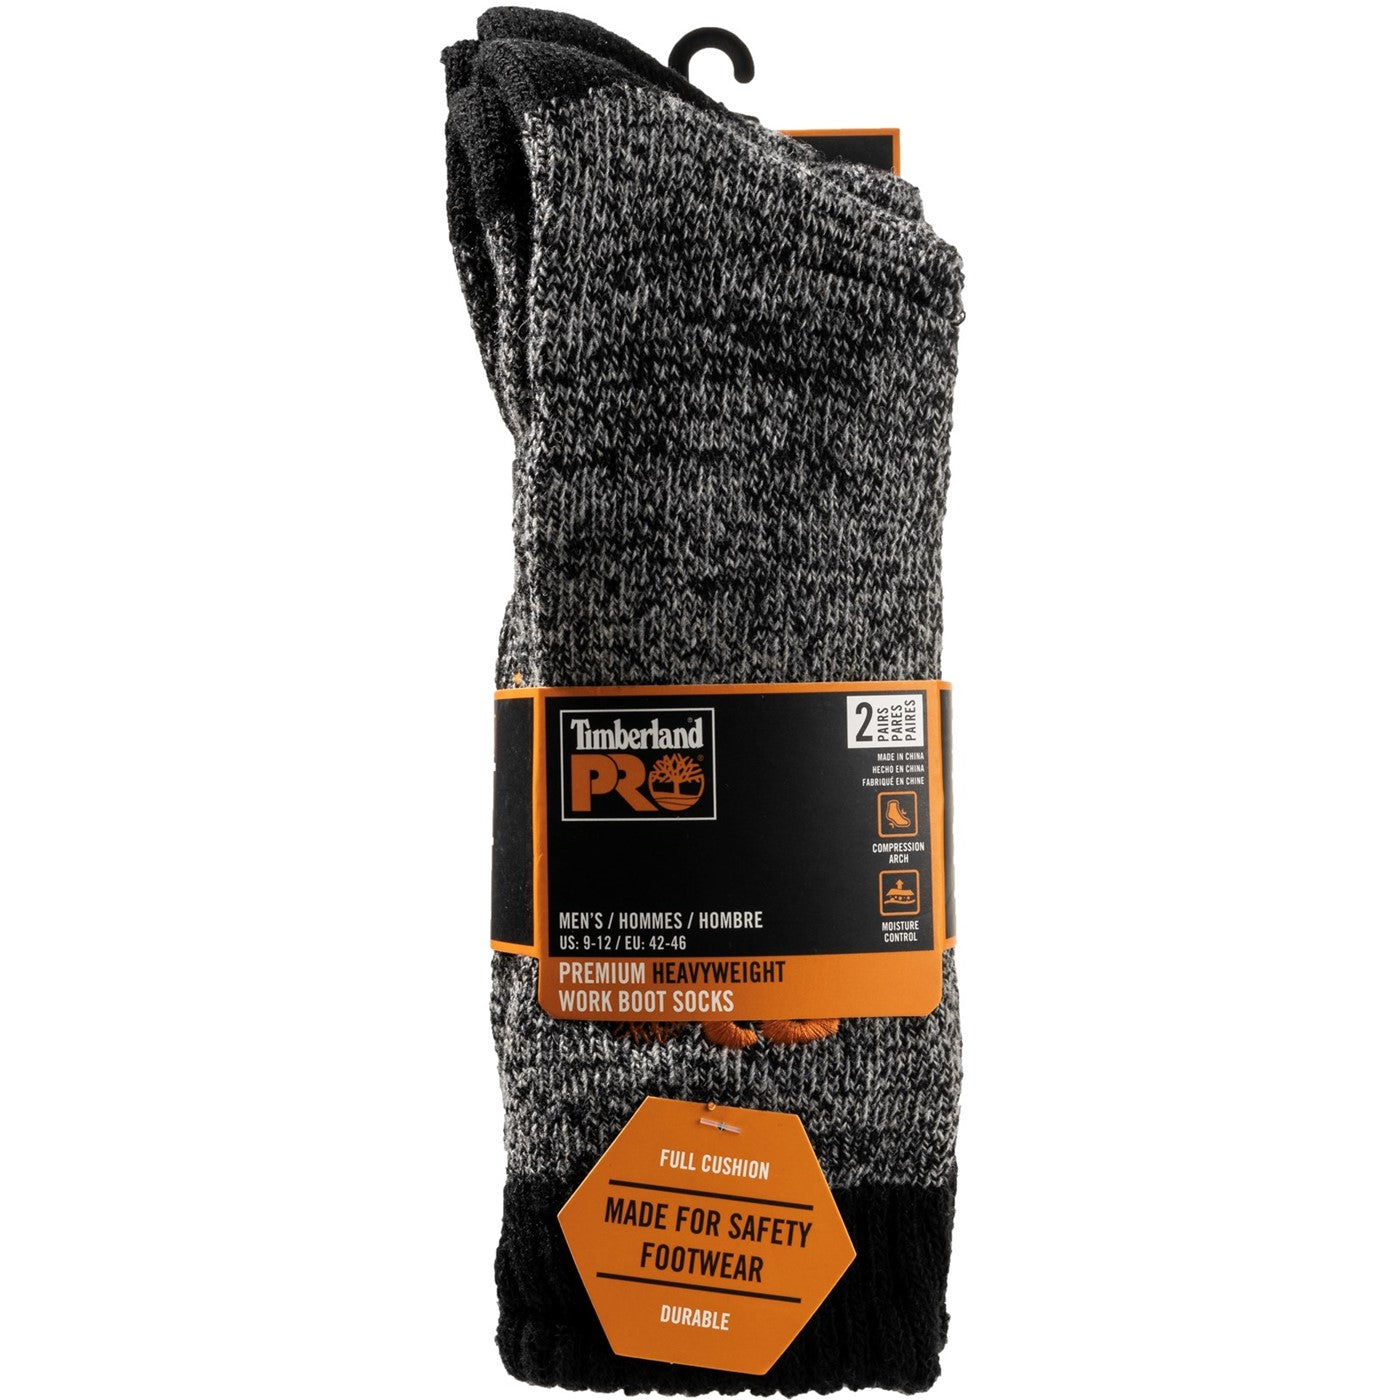 Men's Timberland Pro Heavy Weight Boot Sock 2 Pack